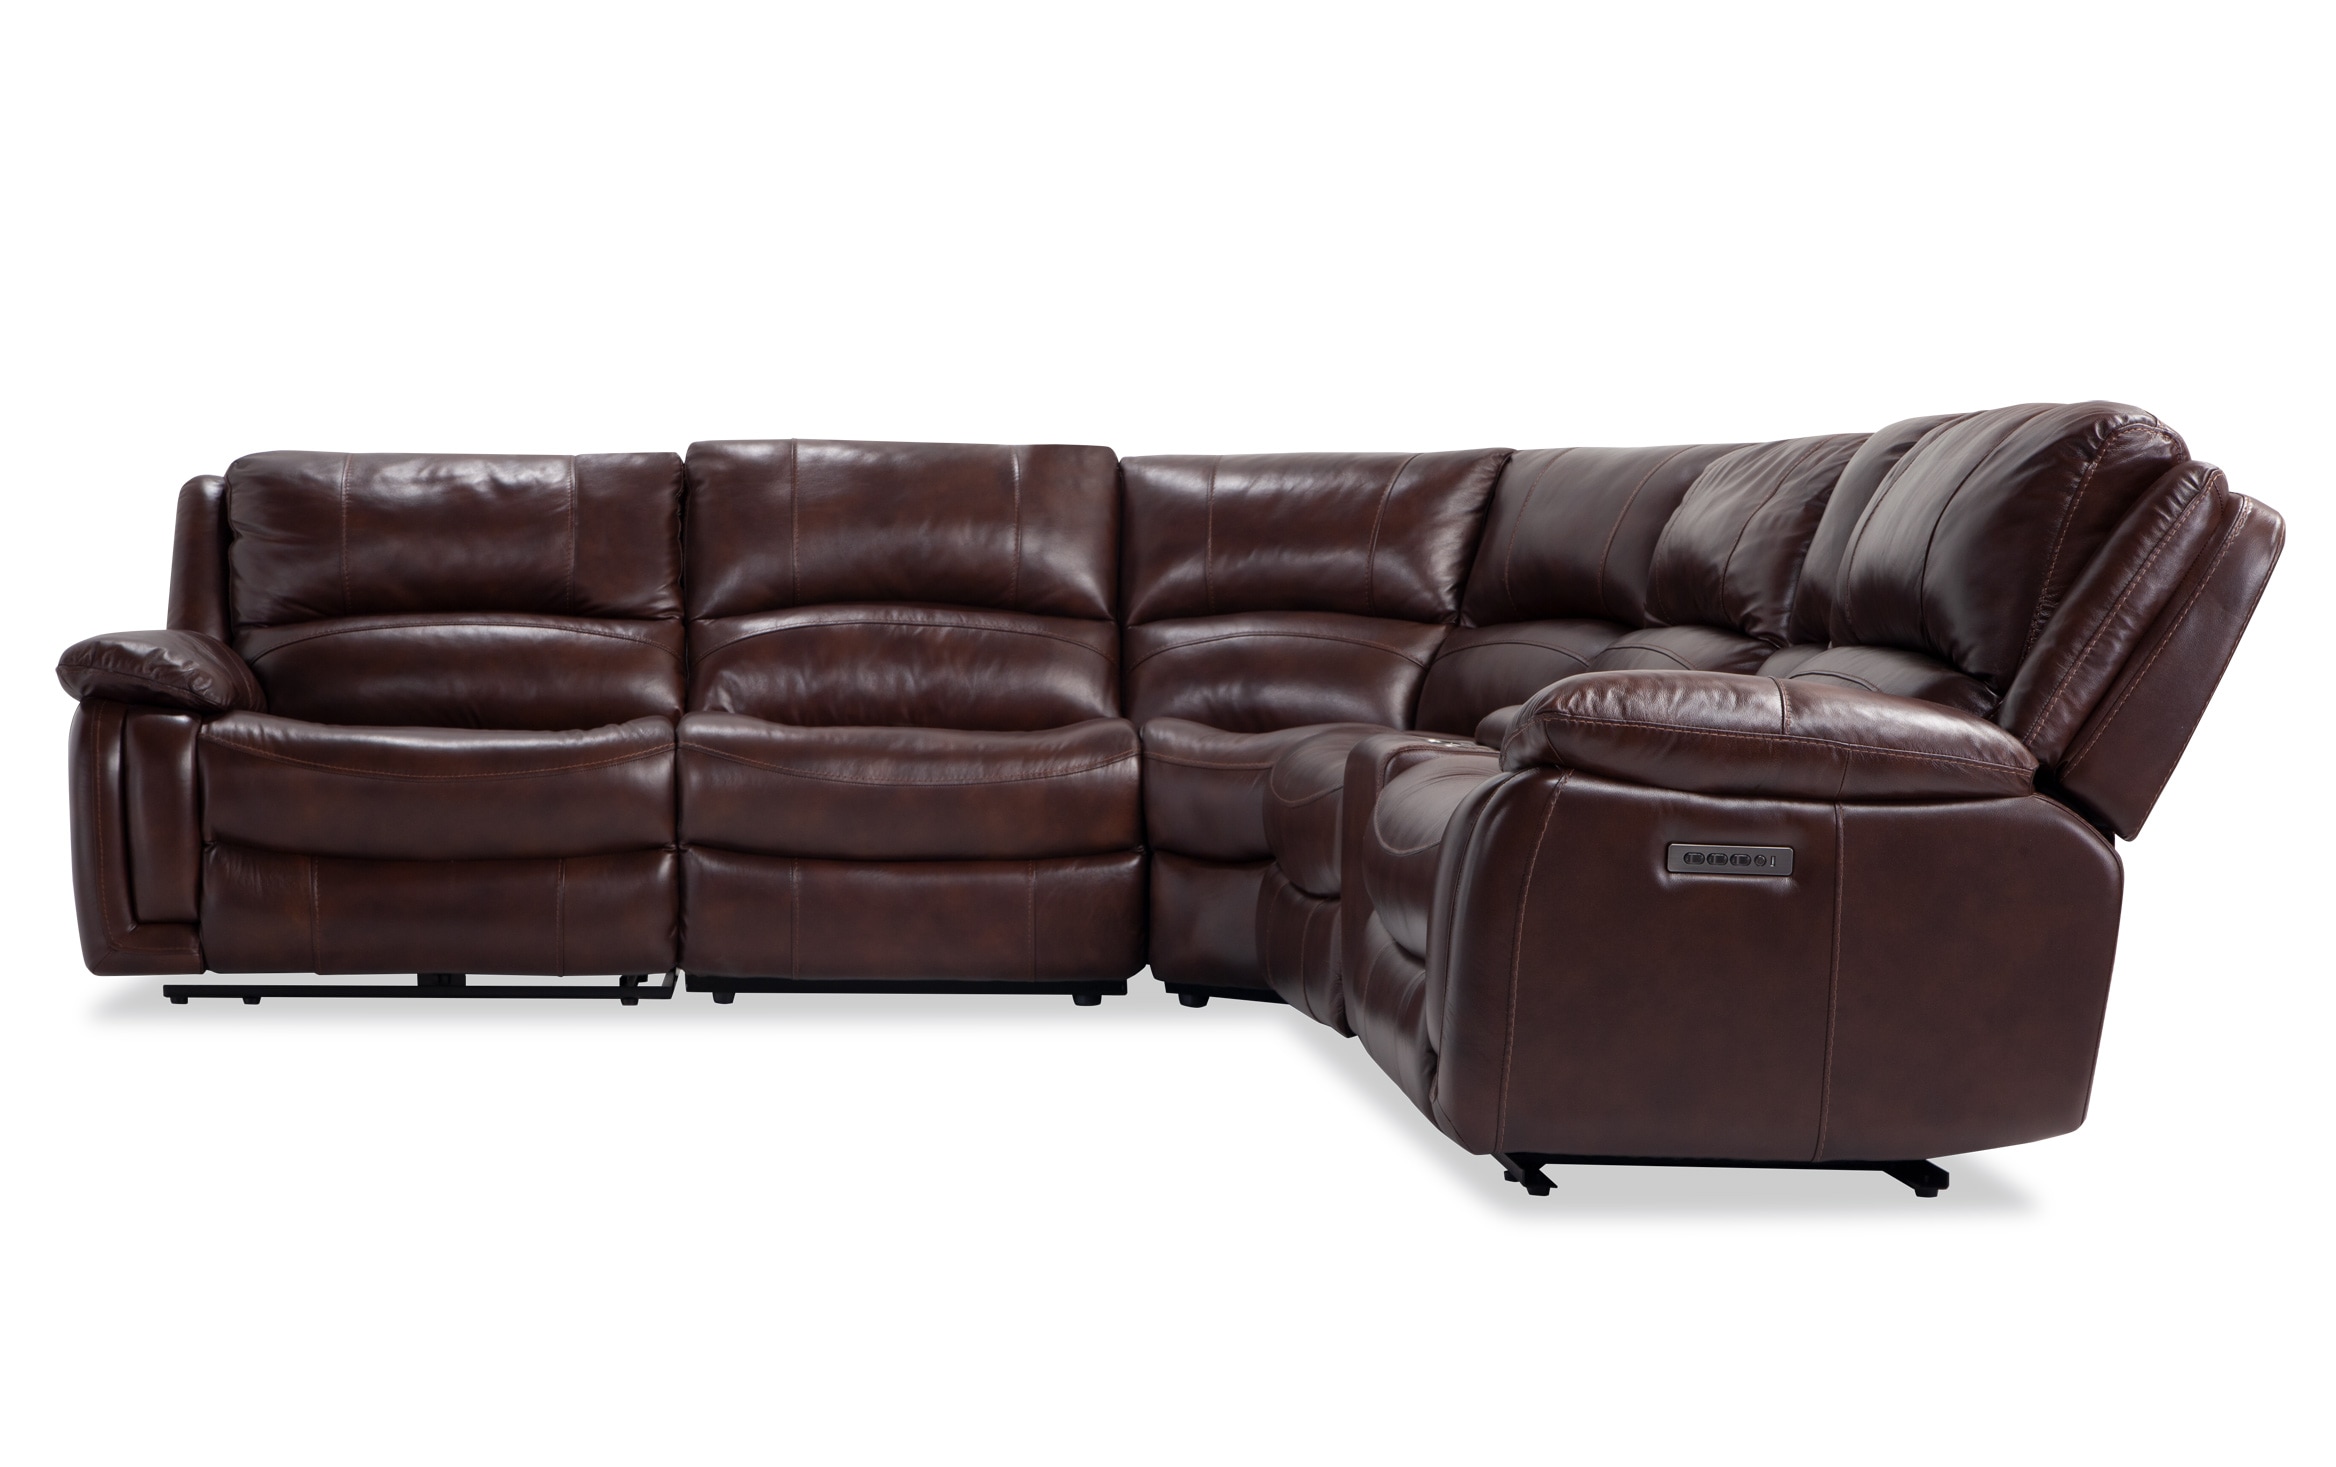 6 Piece Power Reclining Sectional, Leather Couch With Recliners